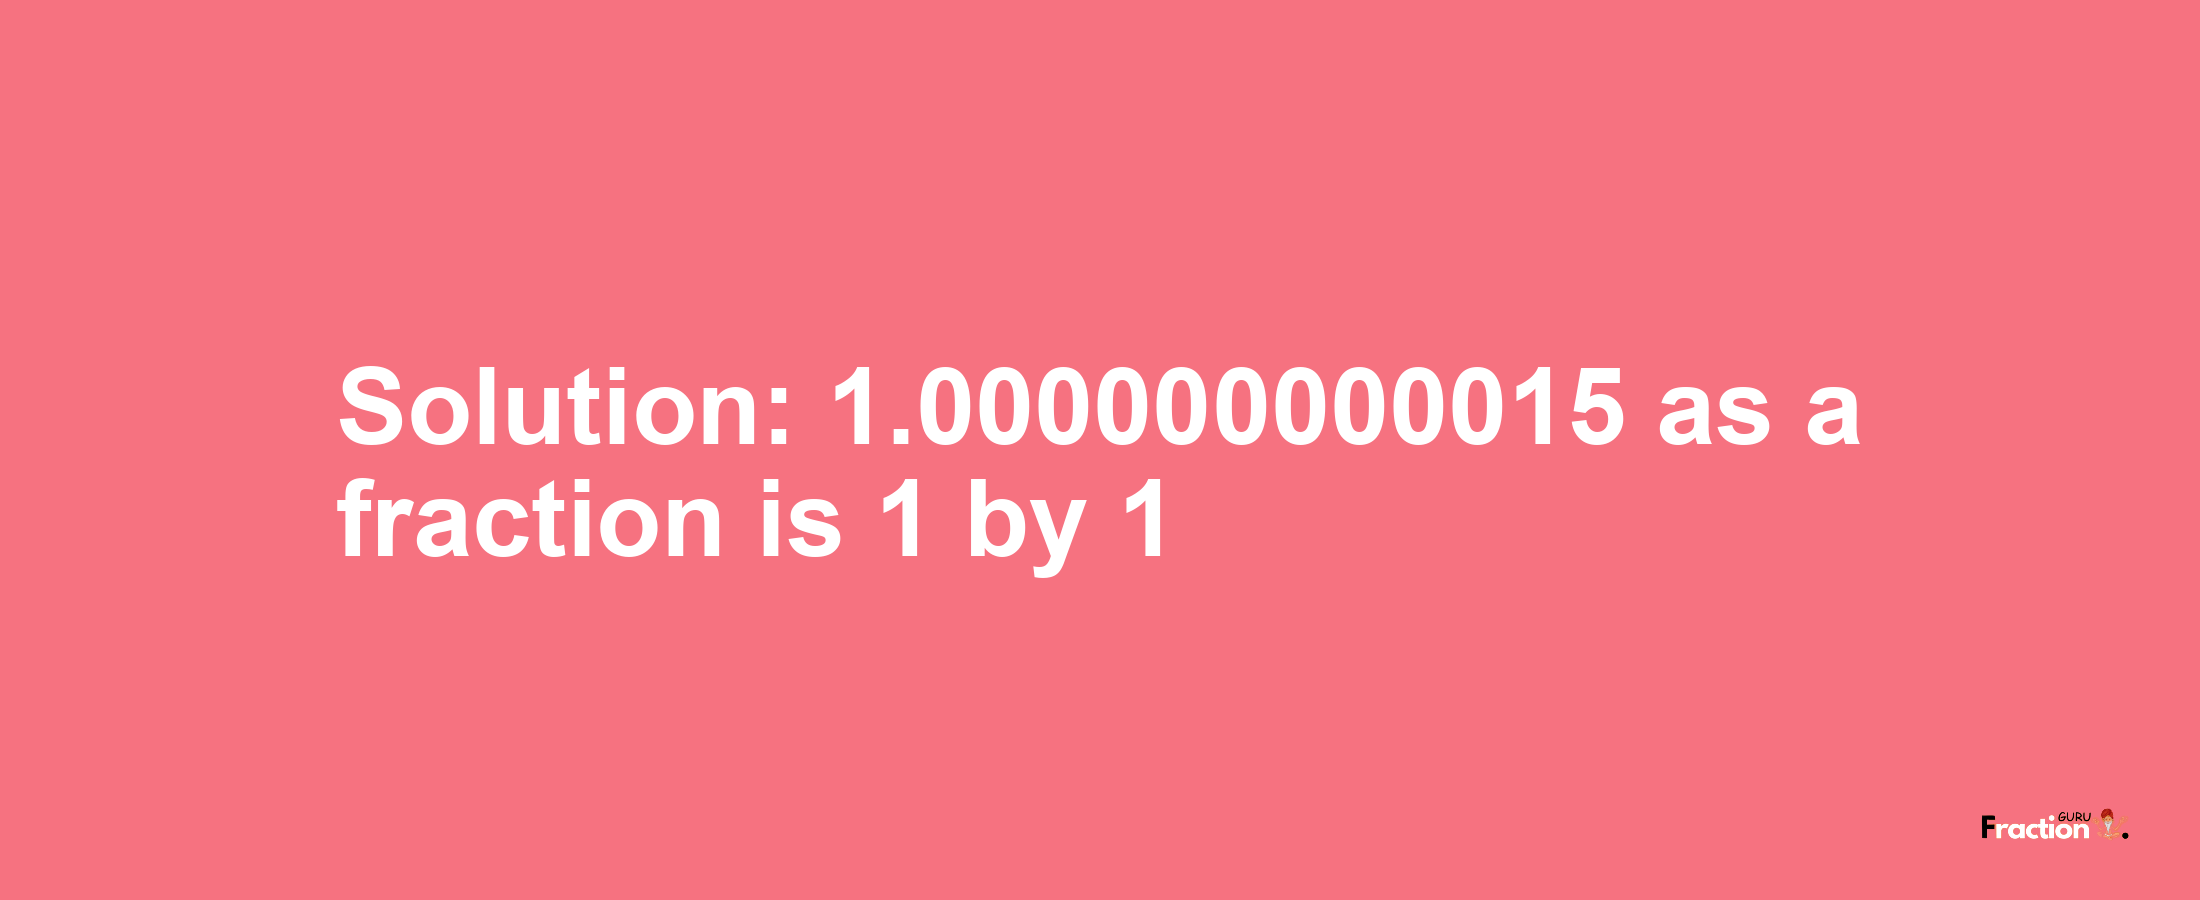 Solution:1.000000000015 as a fraction is 1/1